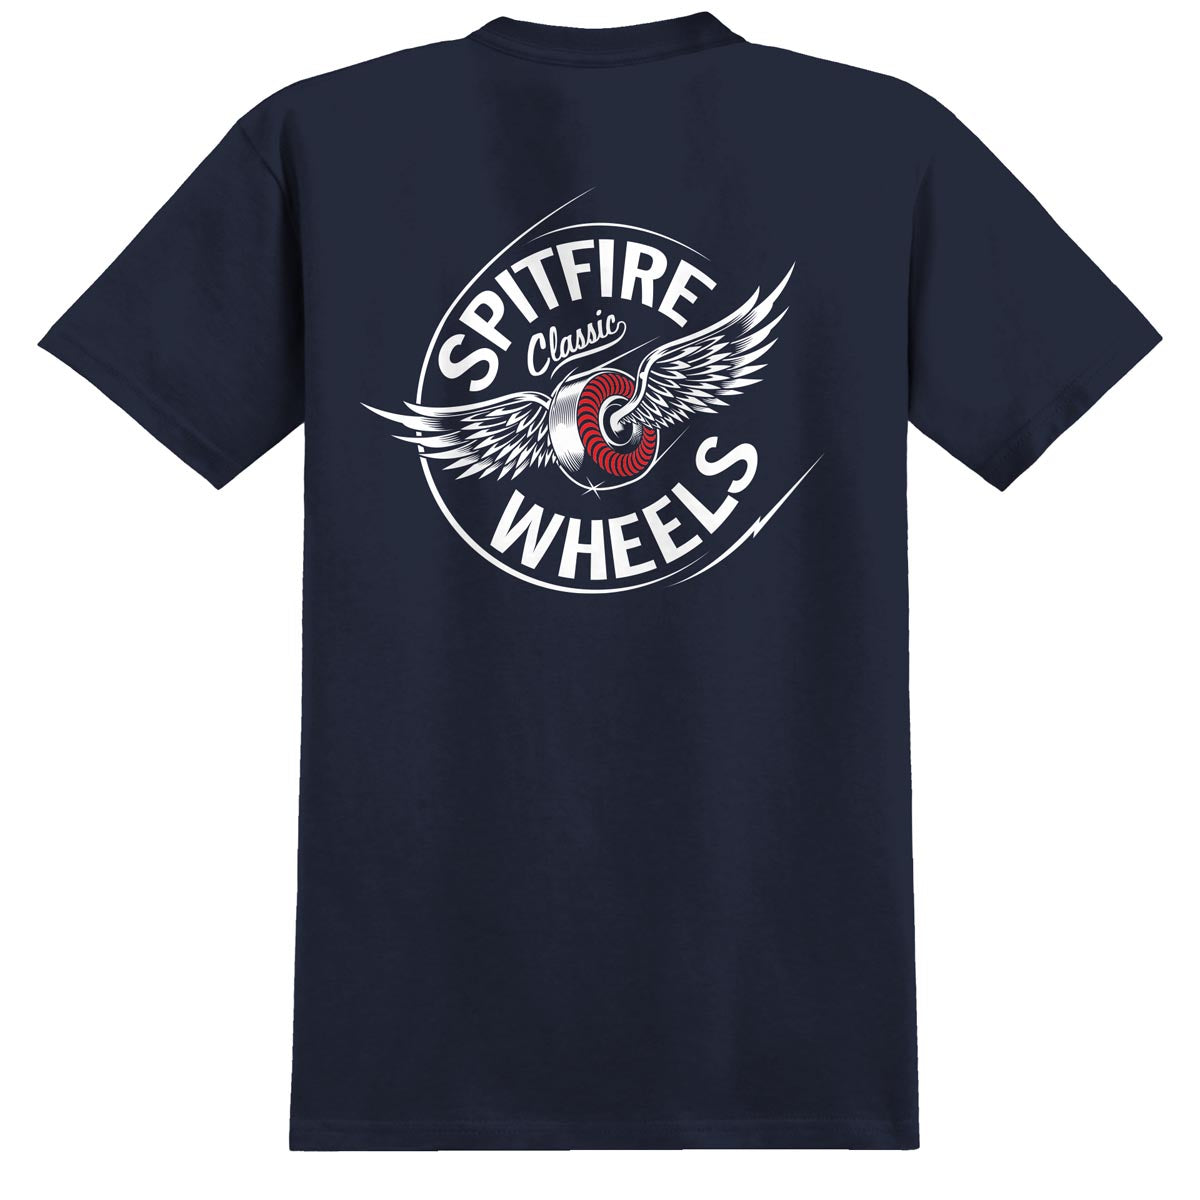 Spitfire Flying Classic T-Shirt - Navy/White/Red image 1